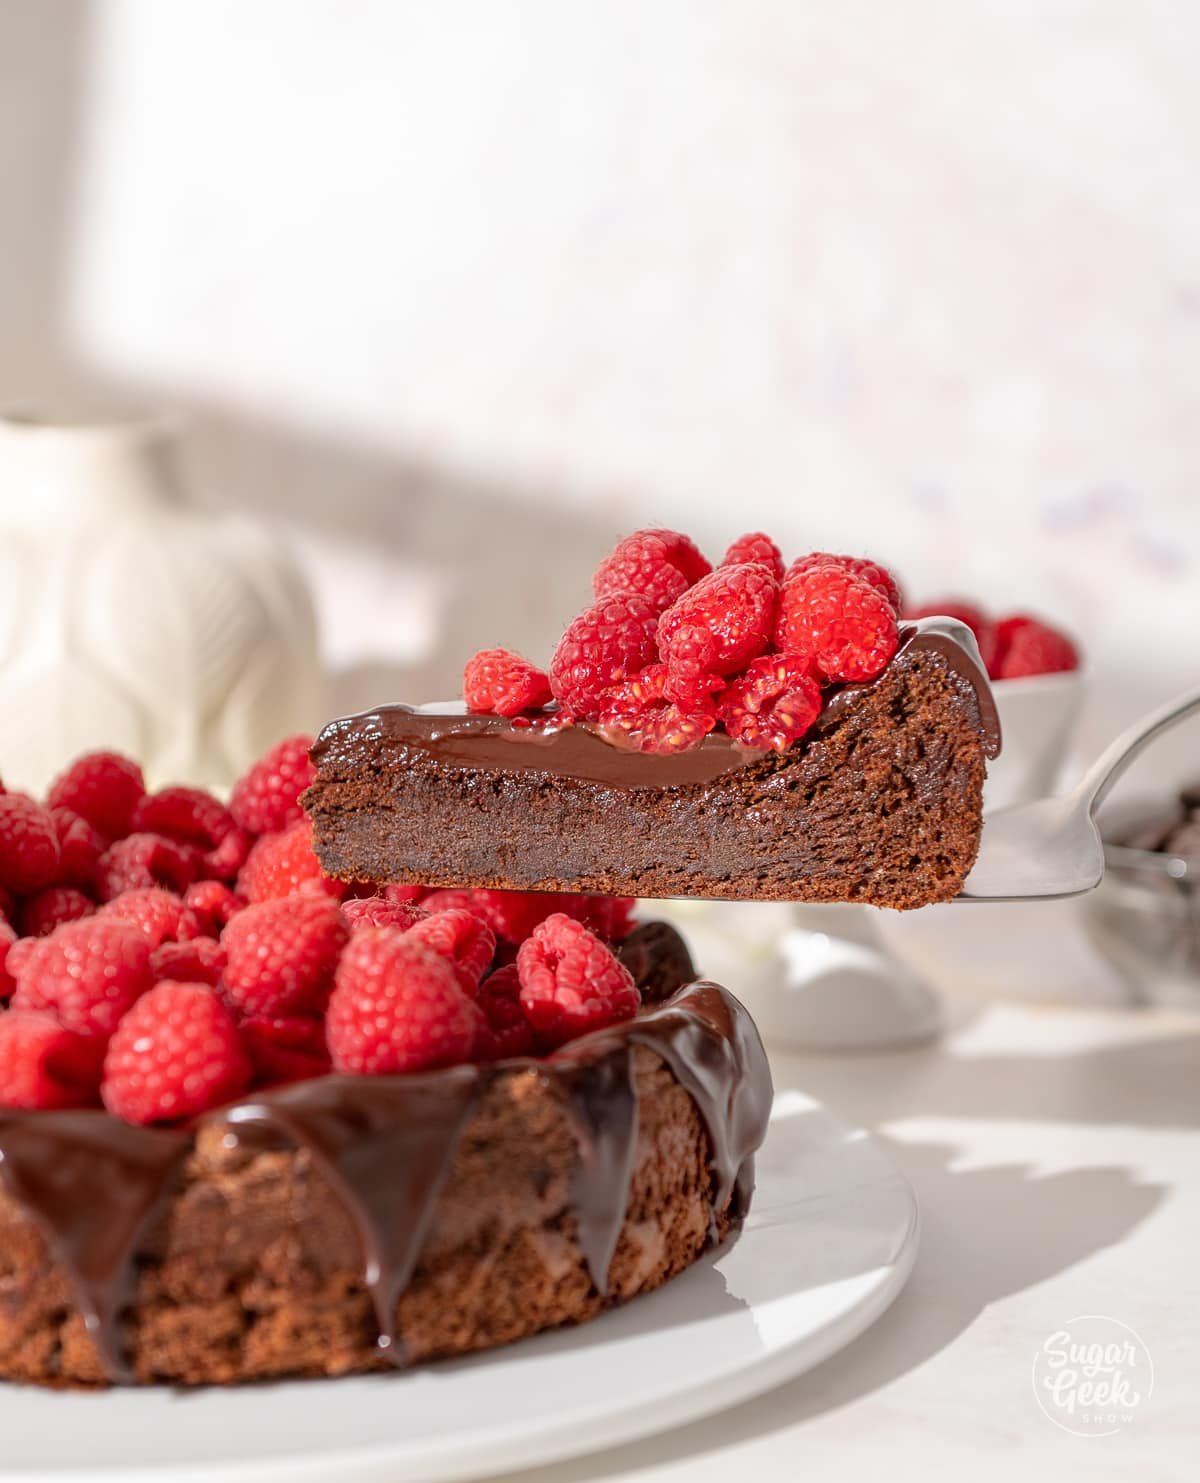 slice of flourless chocolate cake on a plate with raspberries on top lifted out of a cake